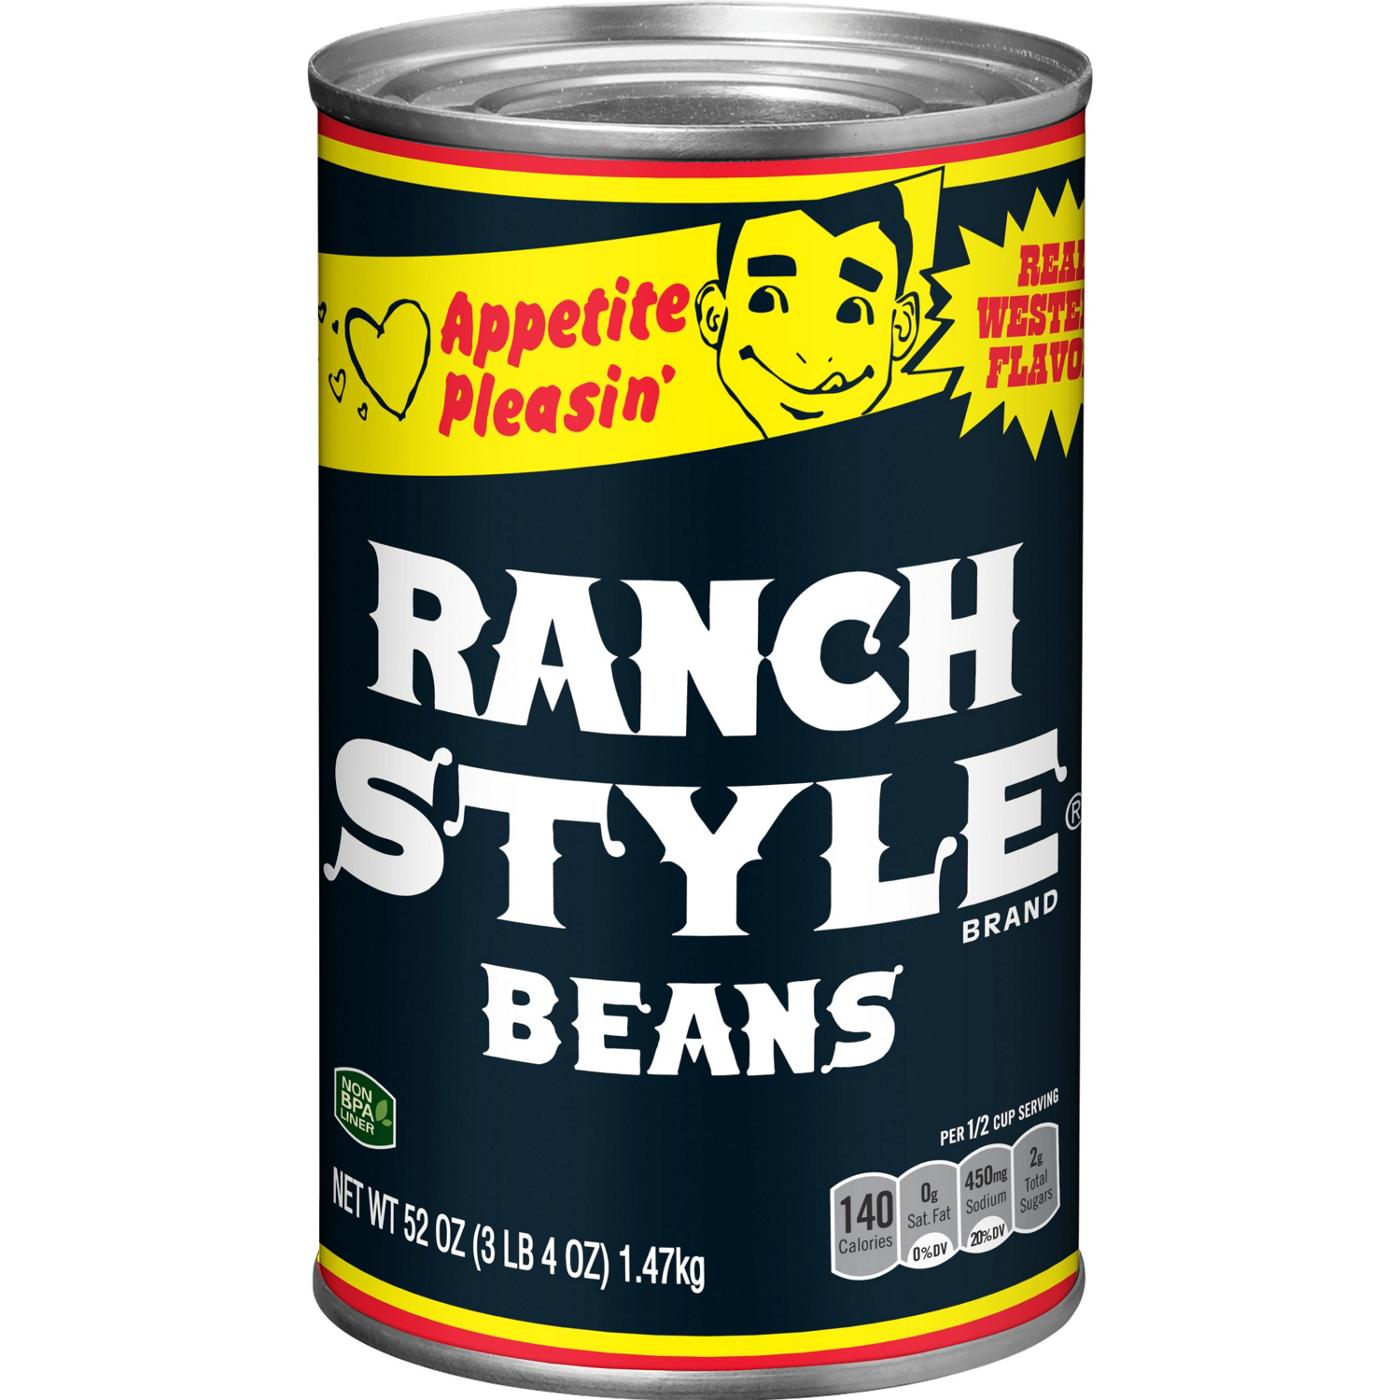 Ranch Style Beans Beans; image 1 of 3